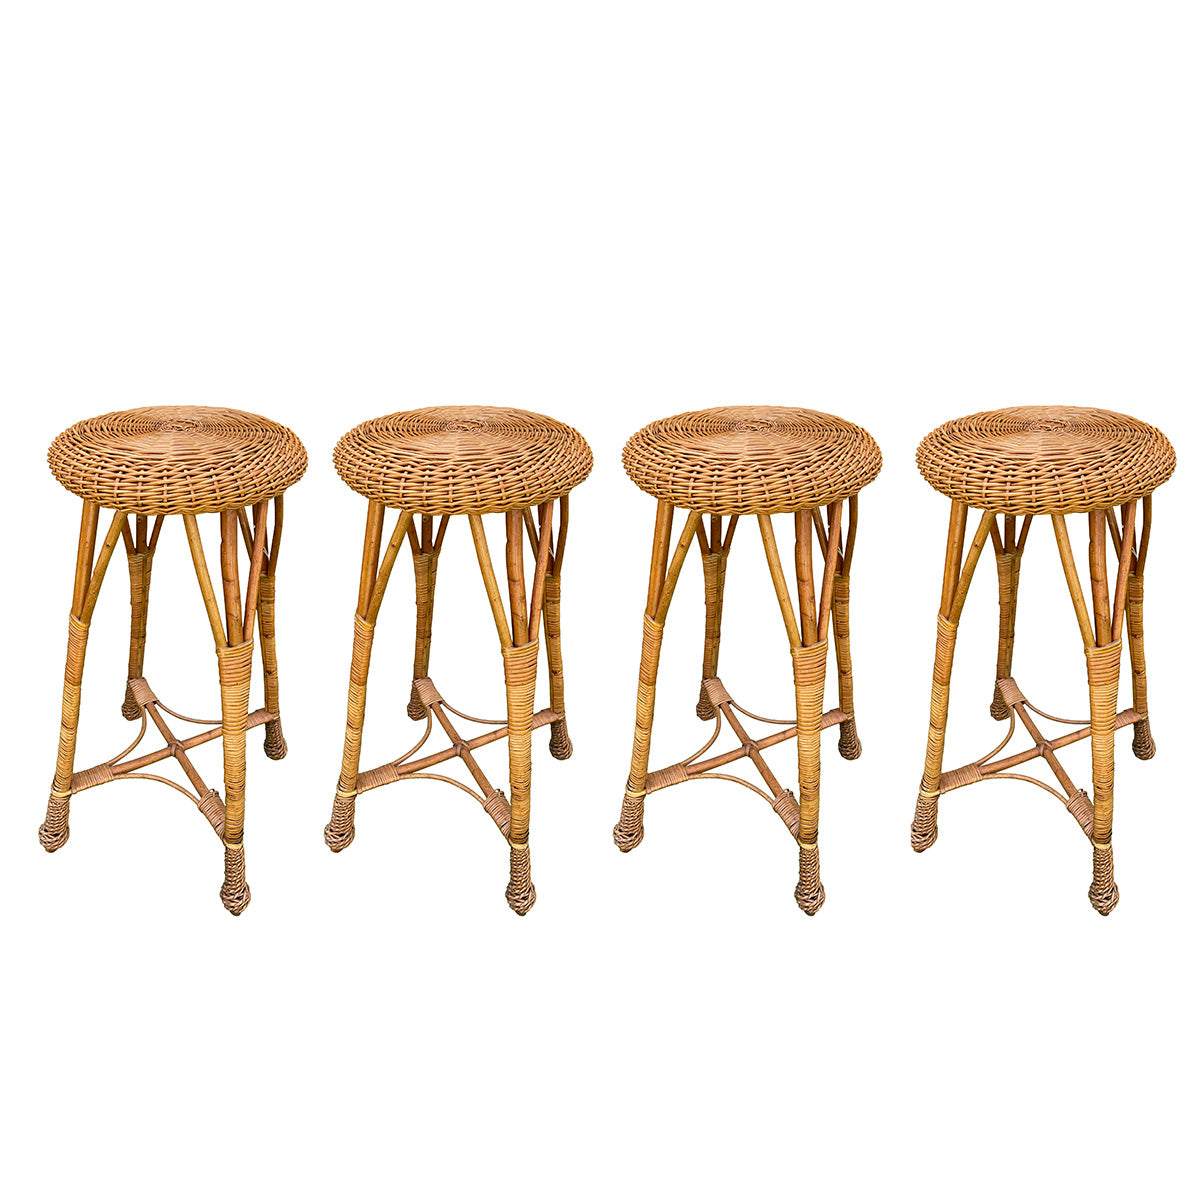 A Set of Four Vintage Wicker Barstools